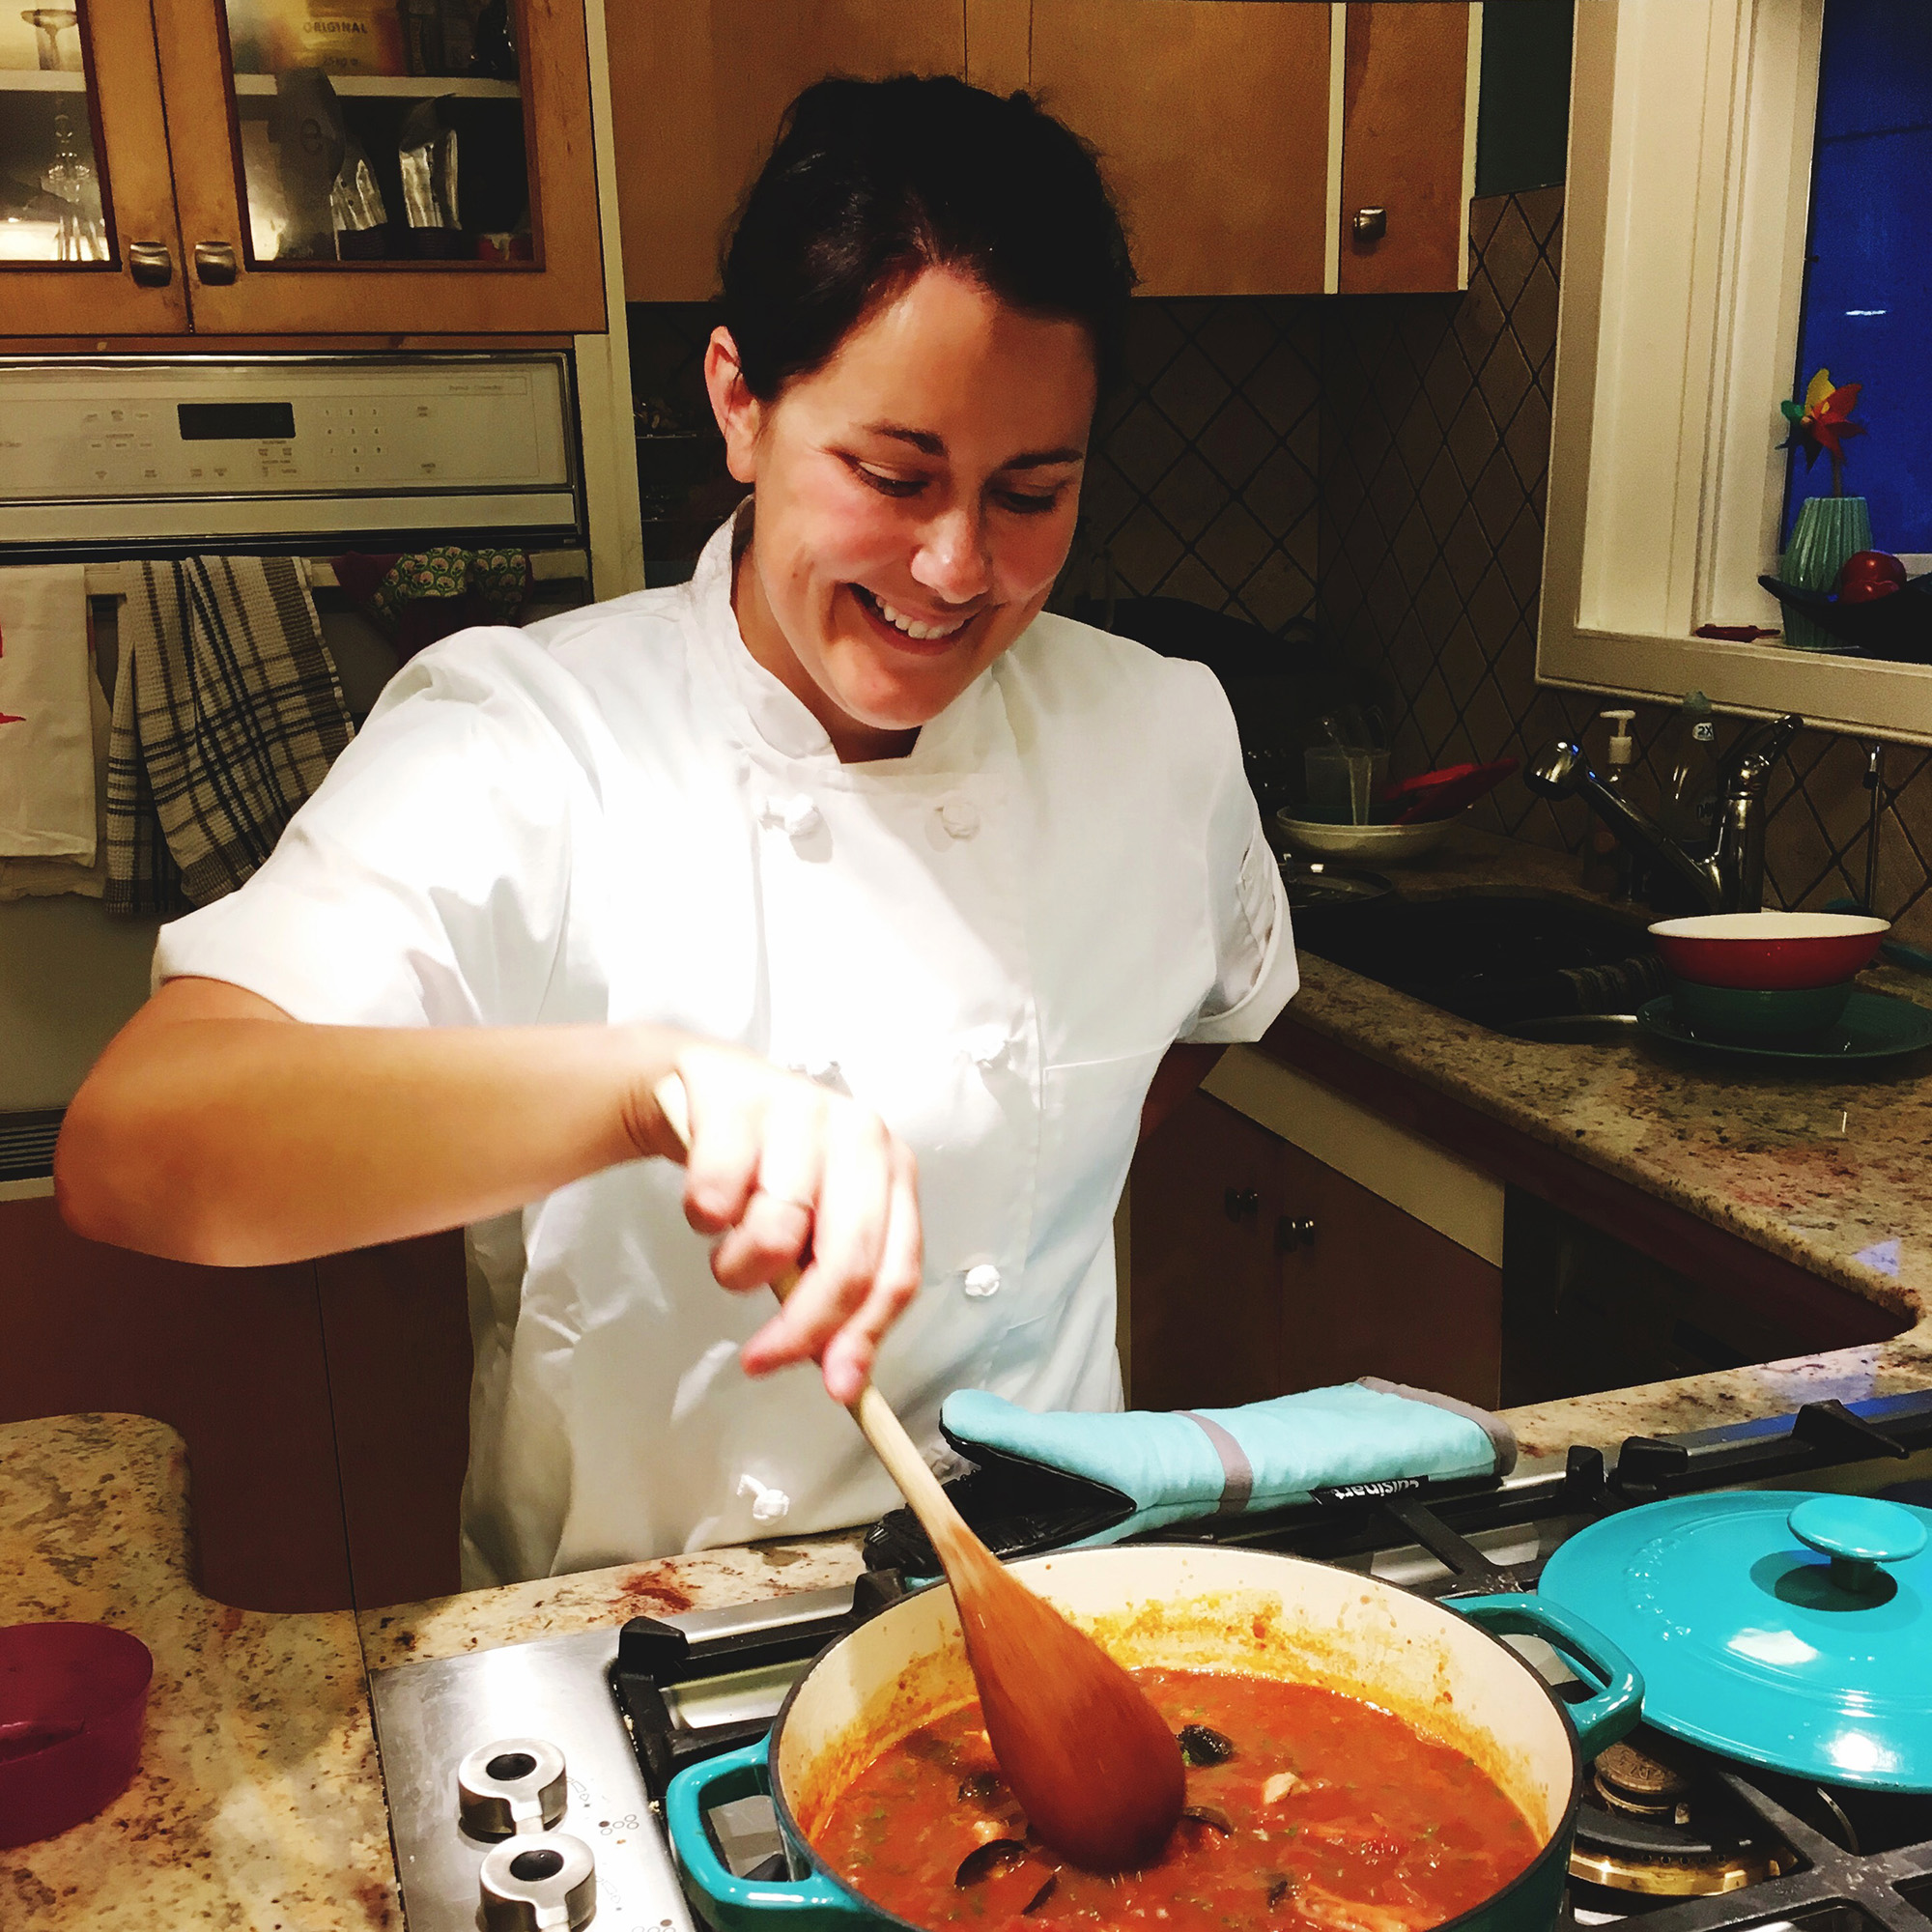 Jen smiles while wearing a chef's jacket and stirring a pot of chili